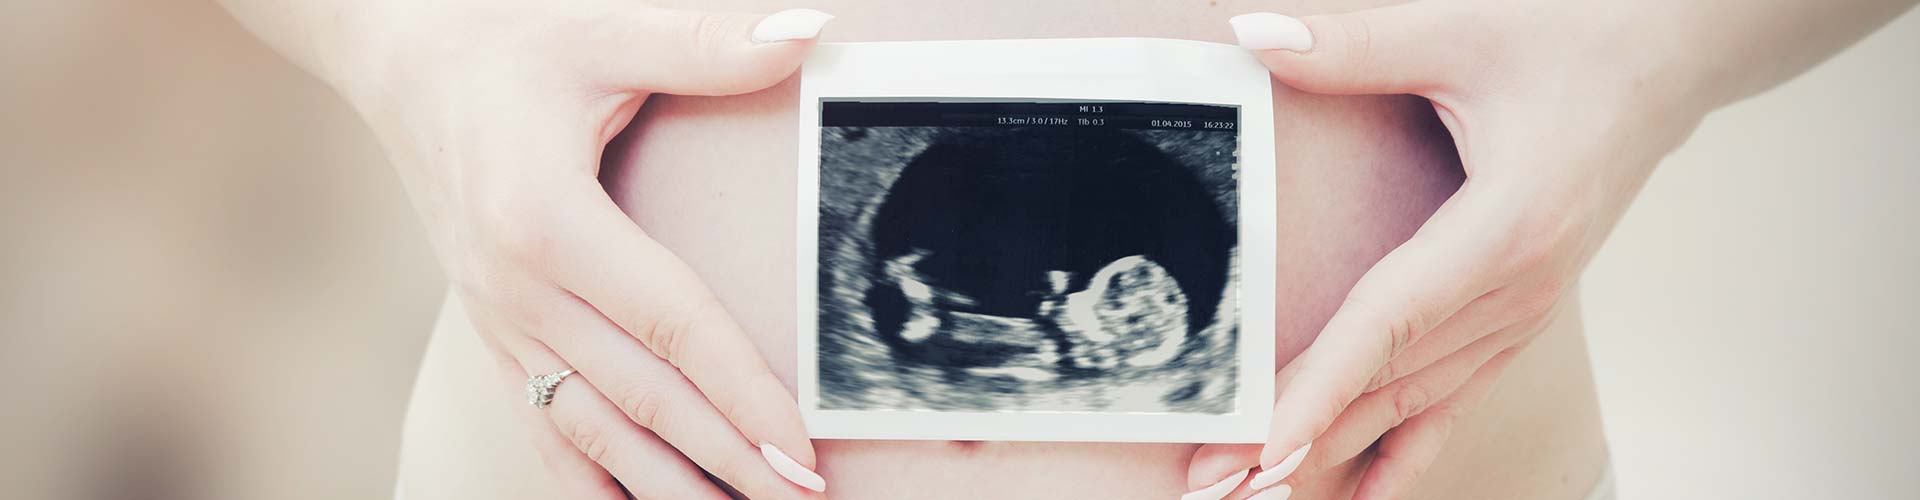 Woman holding ultrasound scan of her baby.